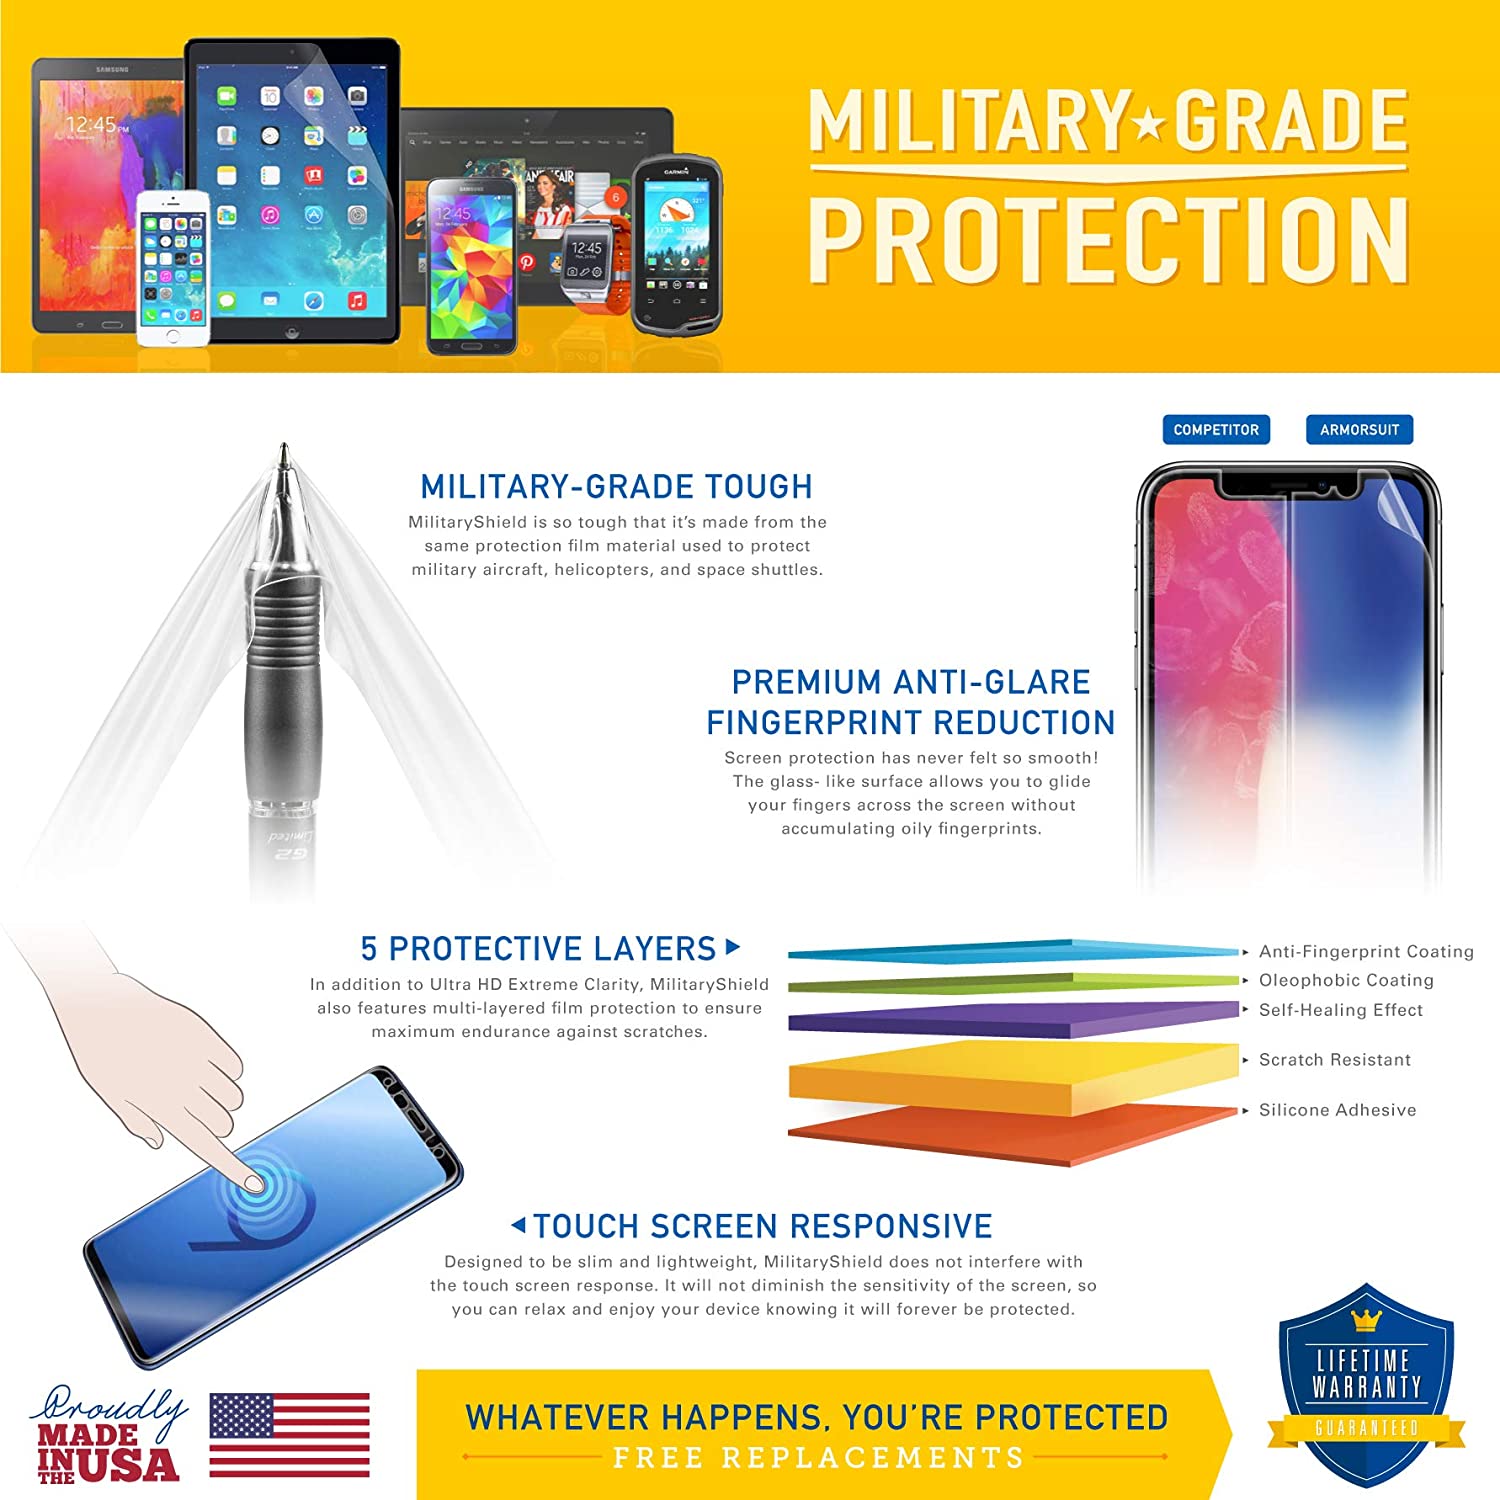 [2-Pack] Samsung Galaxy S2 / SII (AT&T U.S. Version) Screen Protector